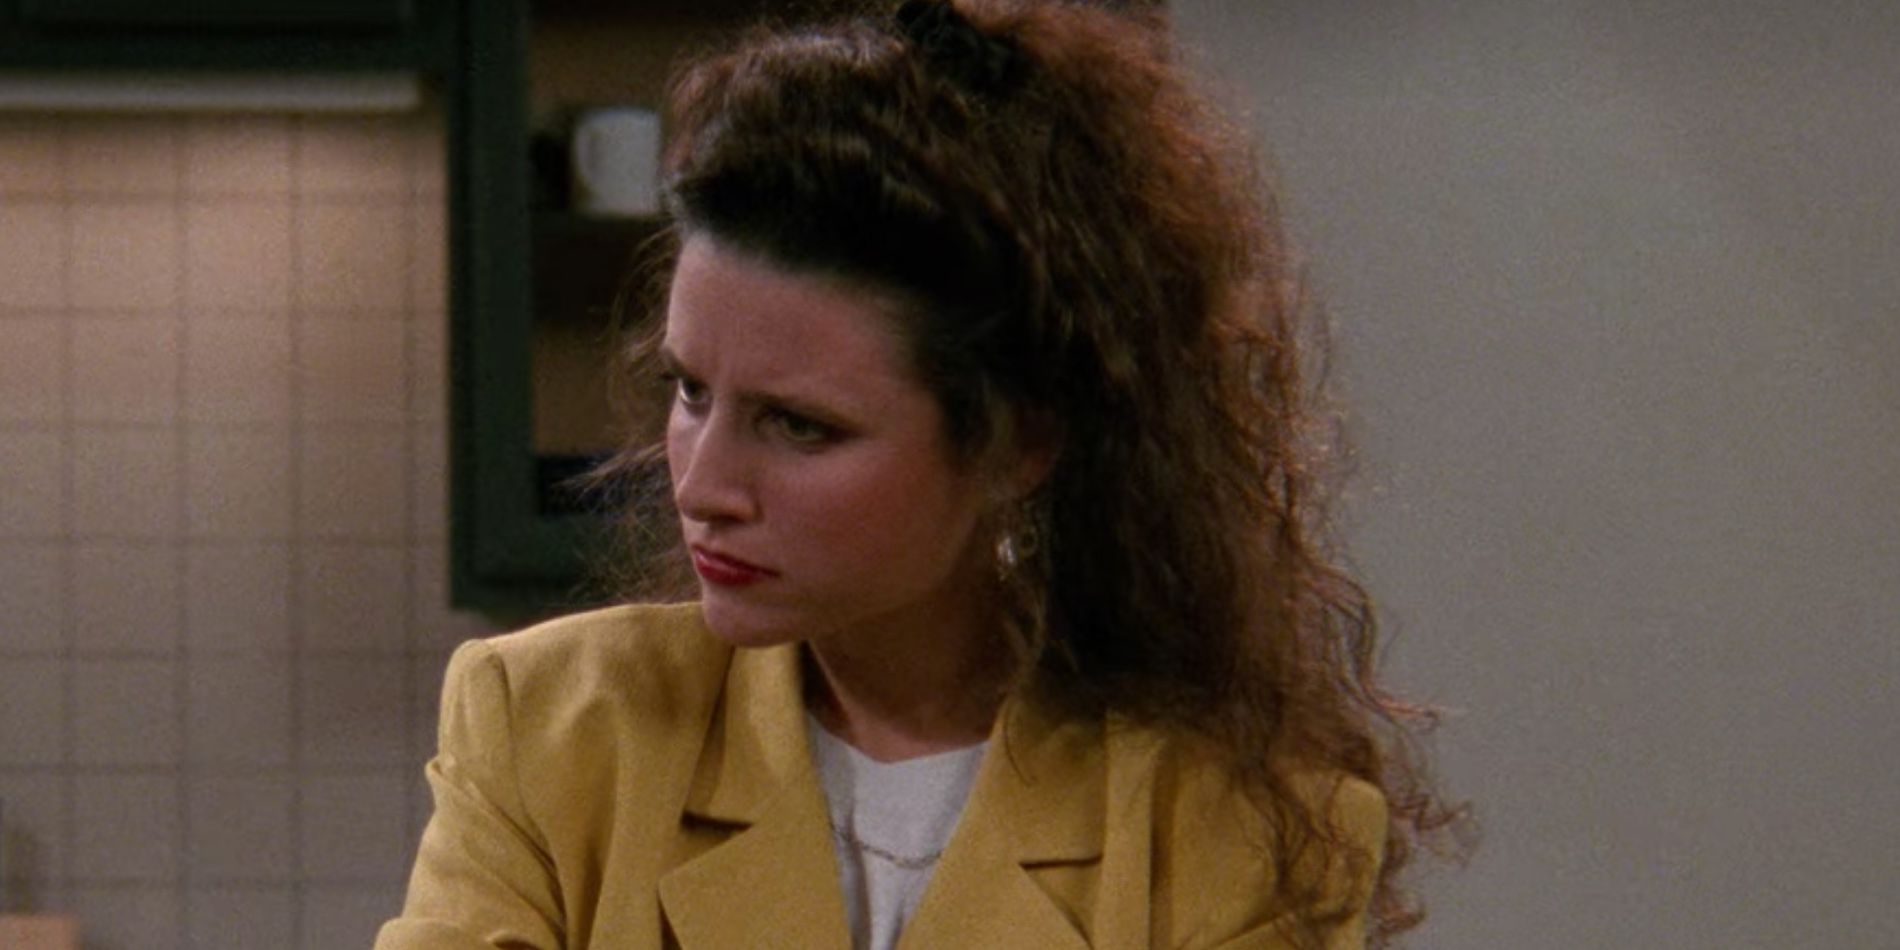 The First Seinfeld Episode Elaine Wasn't In (& Why)